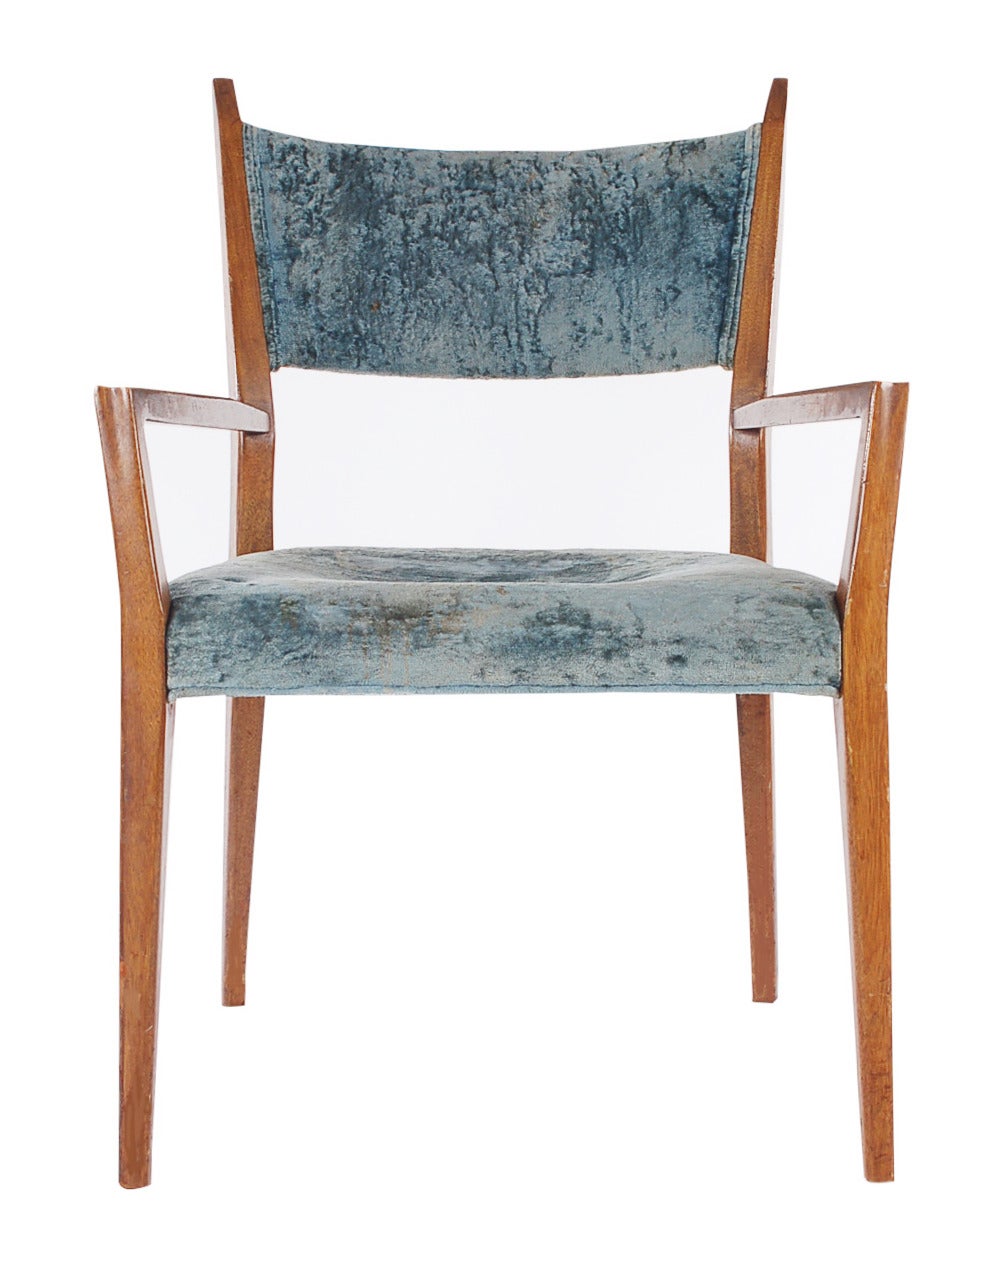 A complete set of six dining chairs designed by Paul McCobb. The chairs feature solid mahogany wood and blue velvet upholstery. Armchairs H34